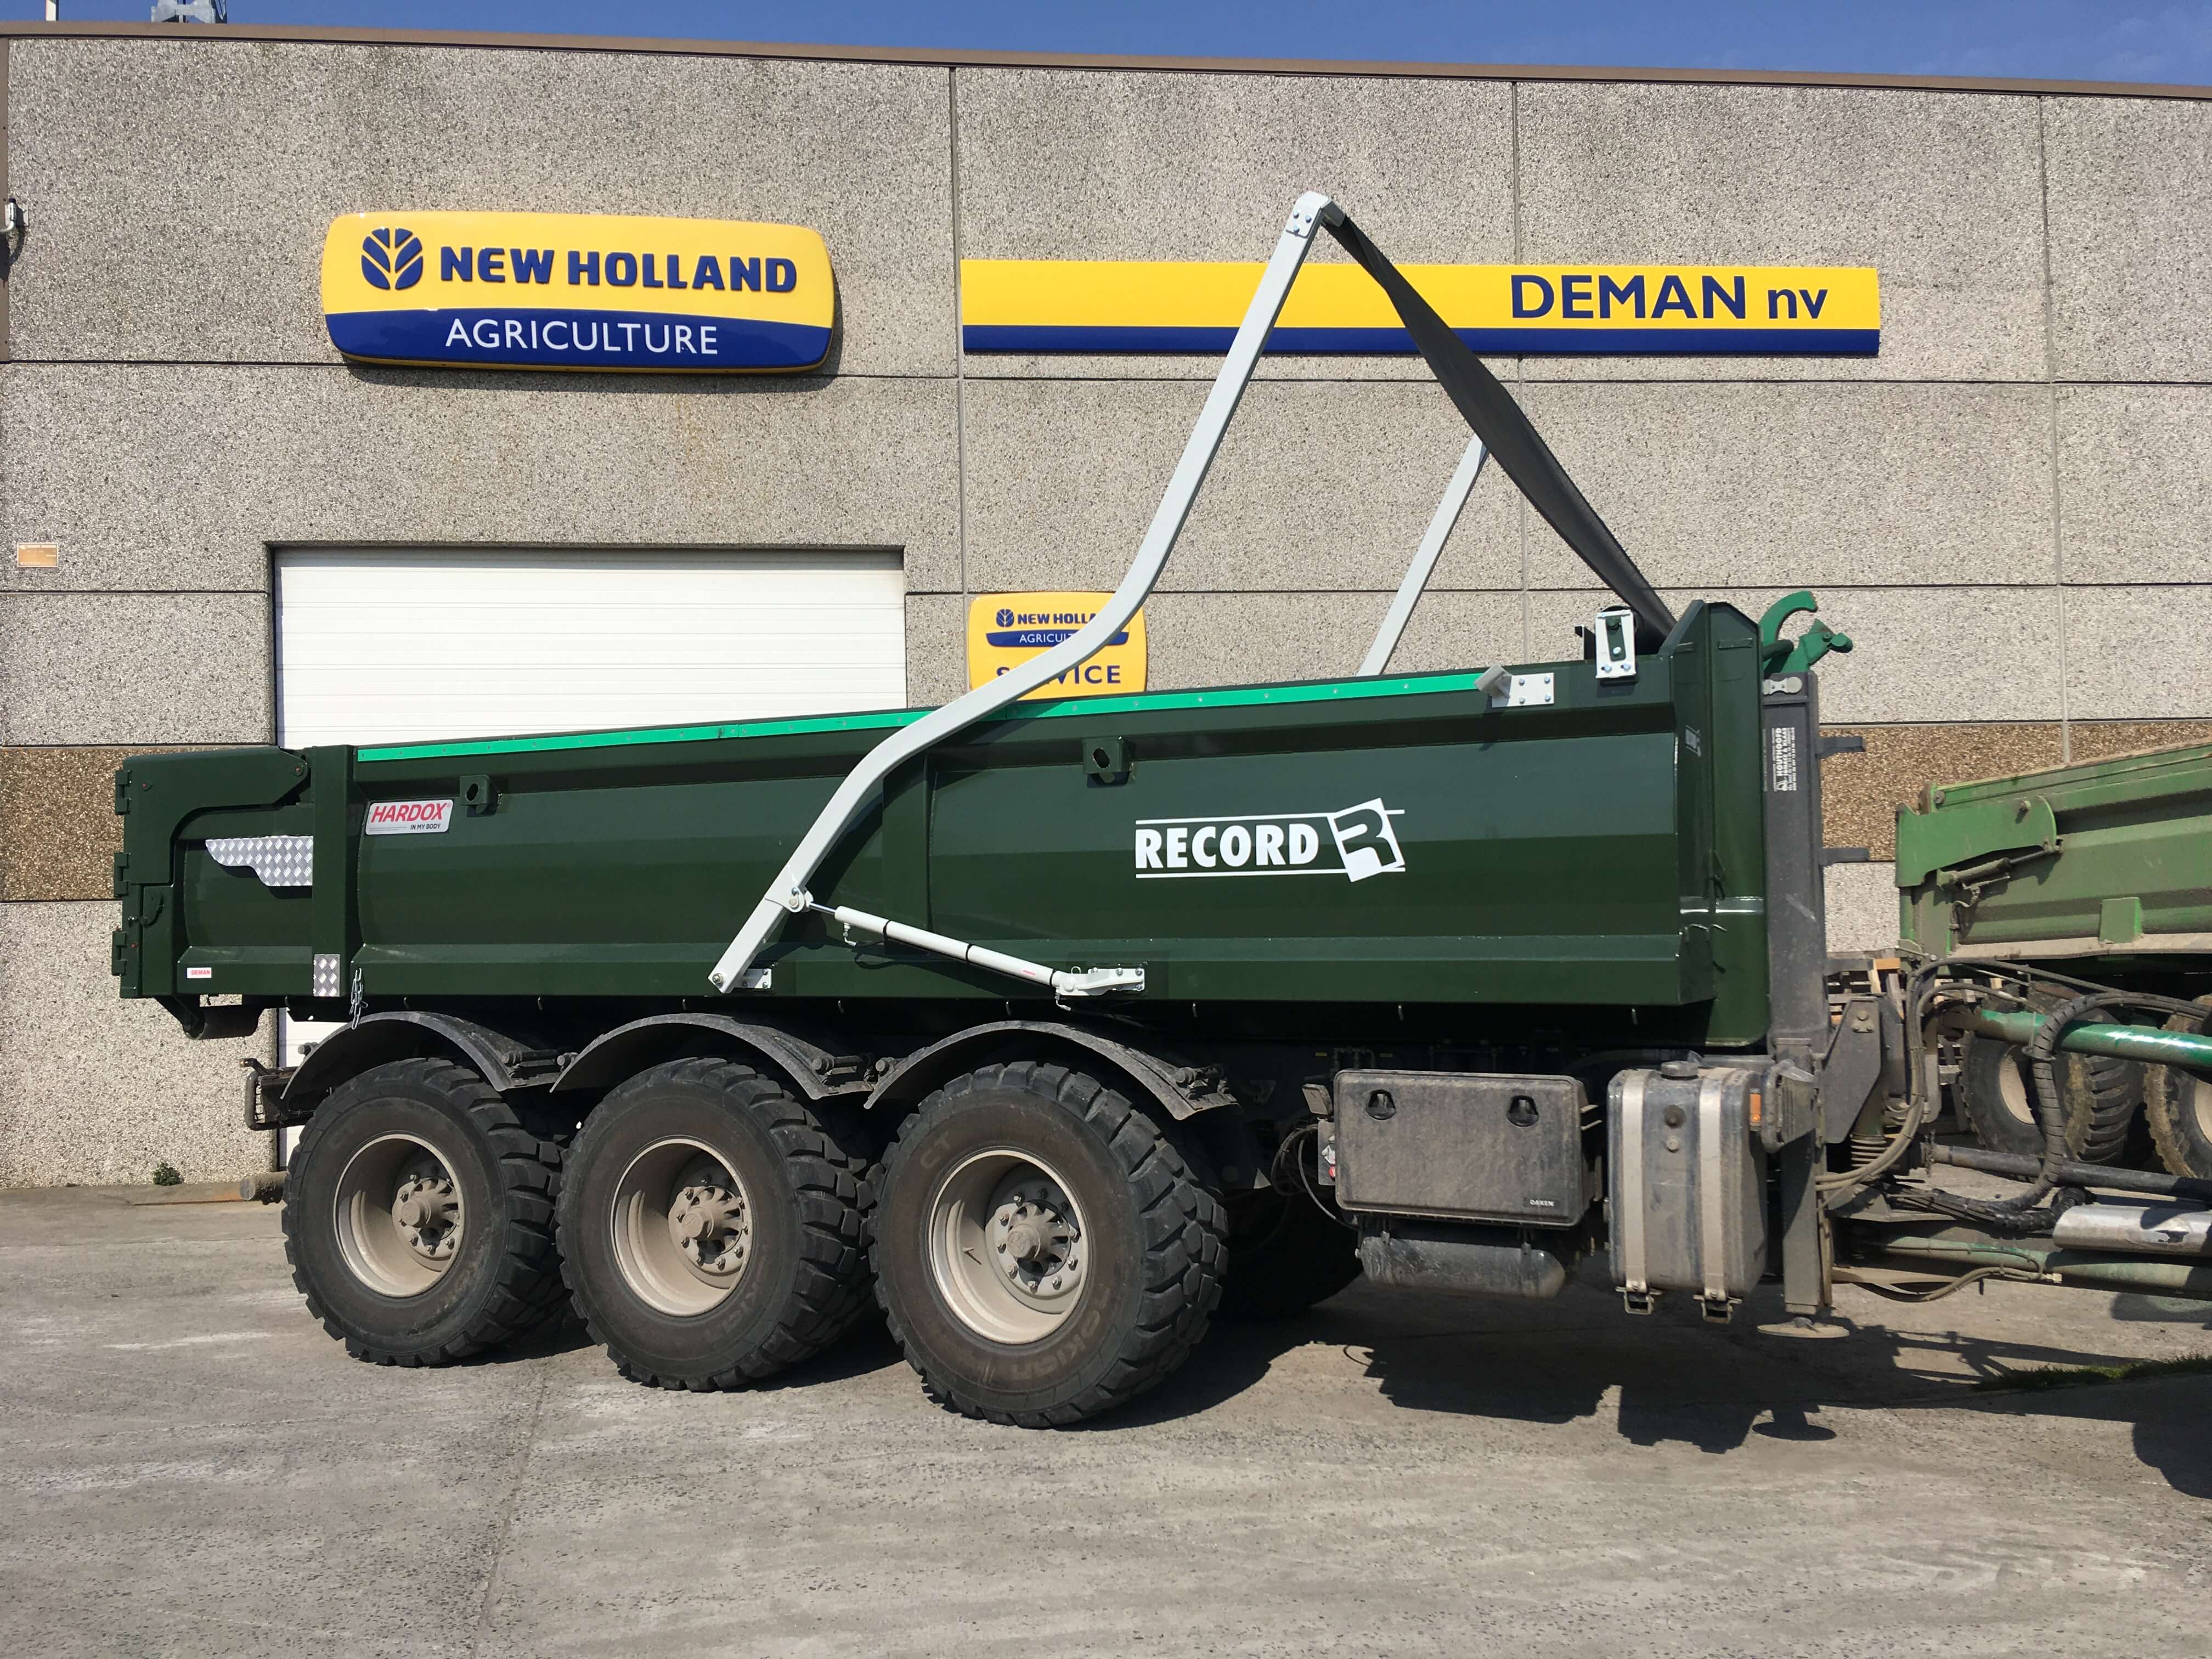 Deman hydraulic arm system puts cover roll over green cargo box